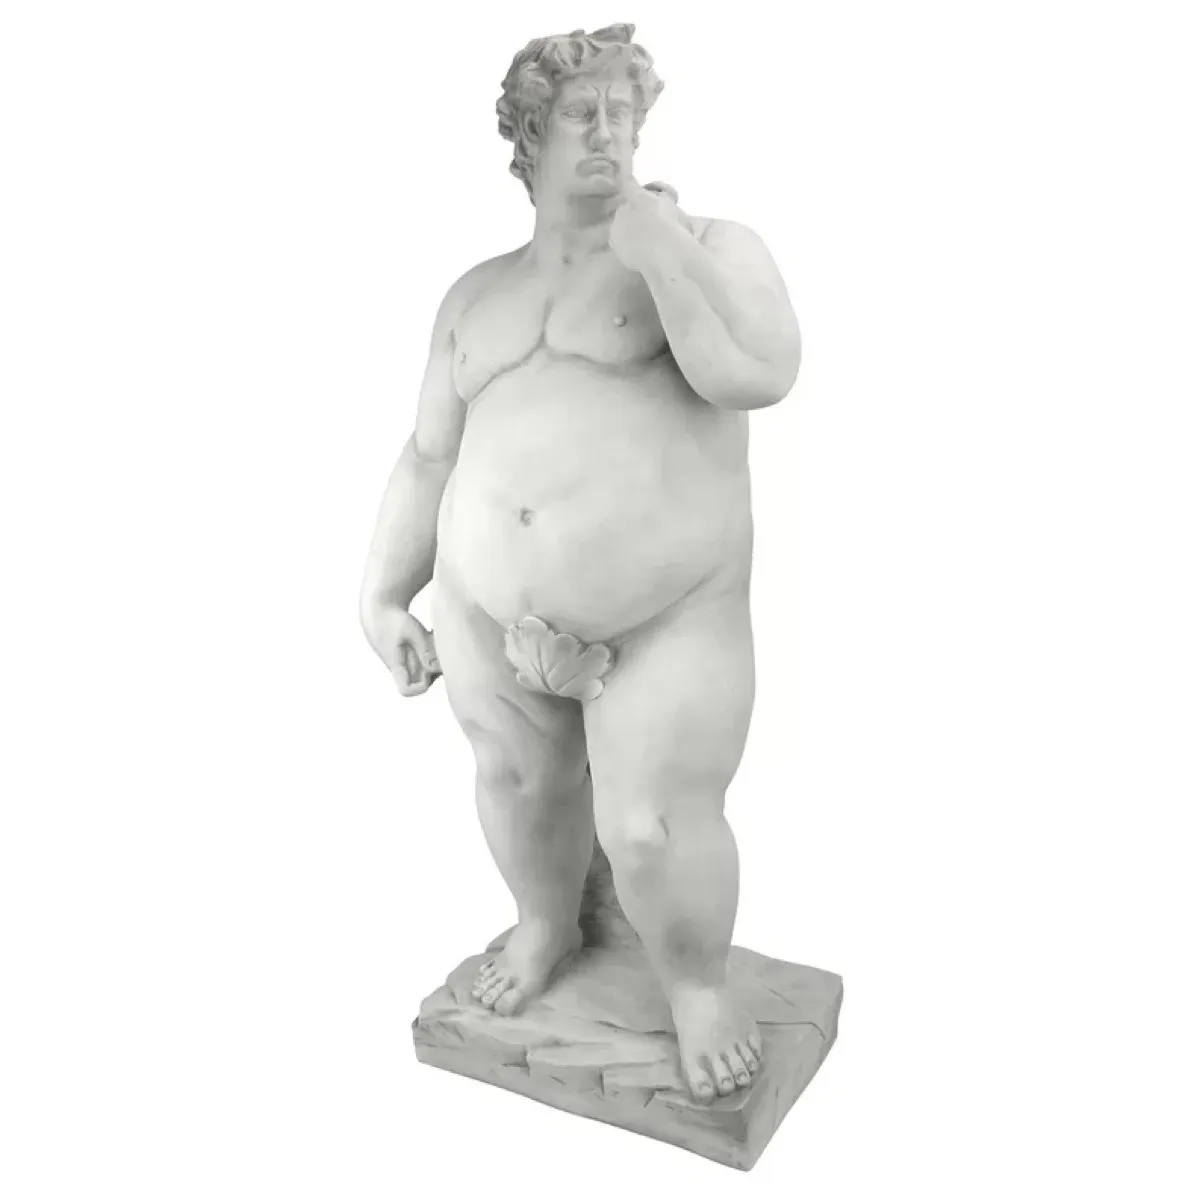 Plus Size Statue of David {Ugly Lawn Decorations}